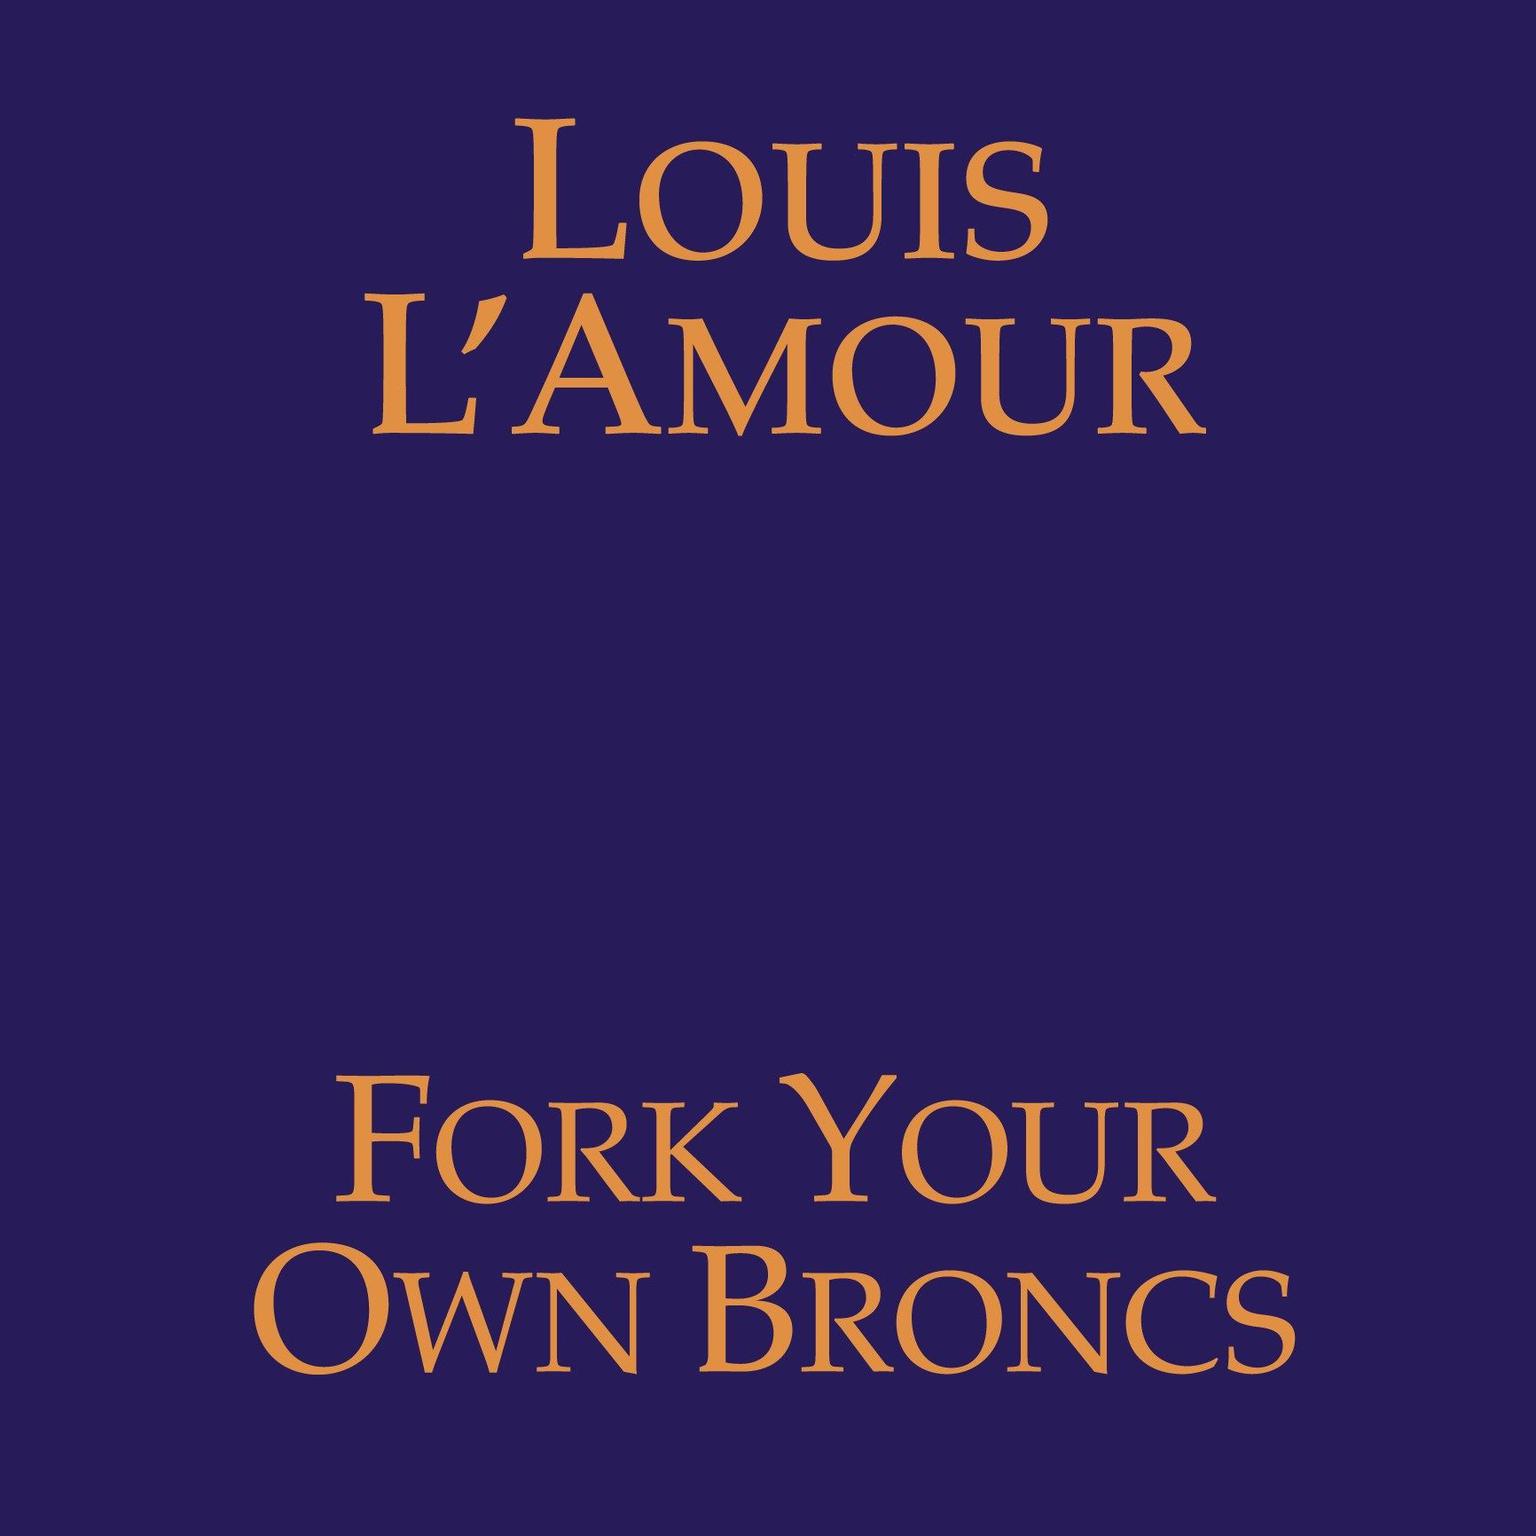 Fork Your Own Broncs Audiobook, by Louis L’Amour